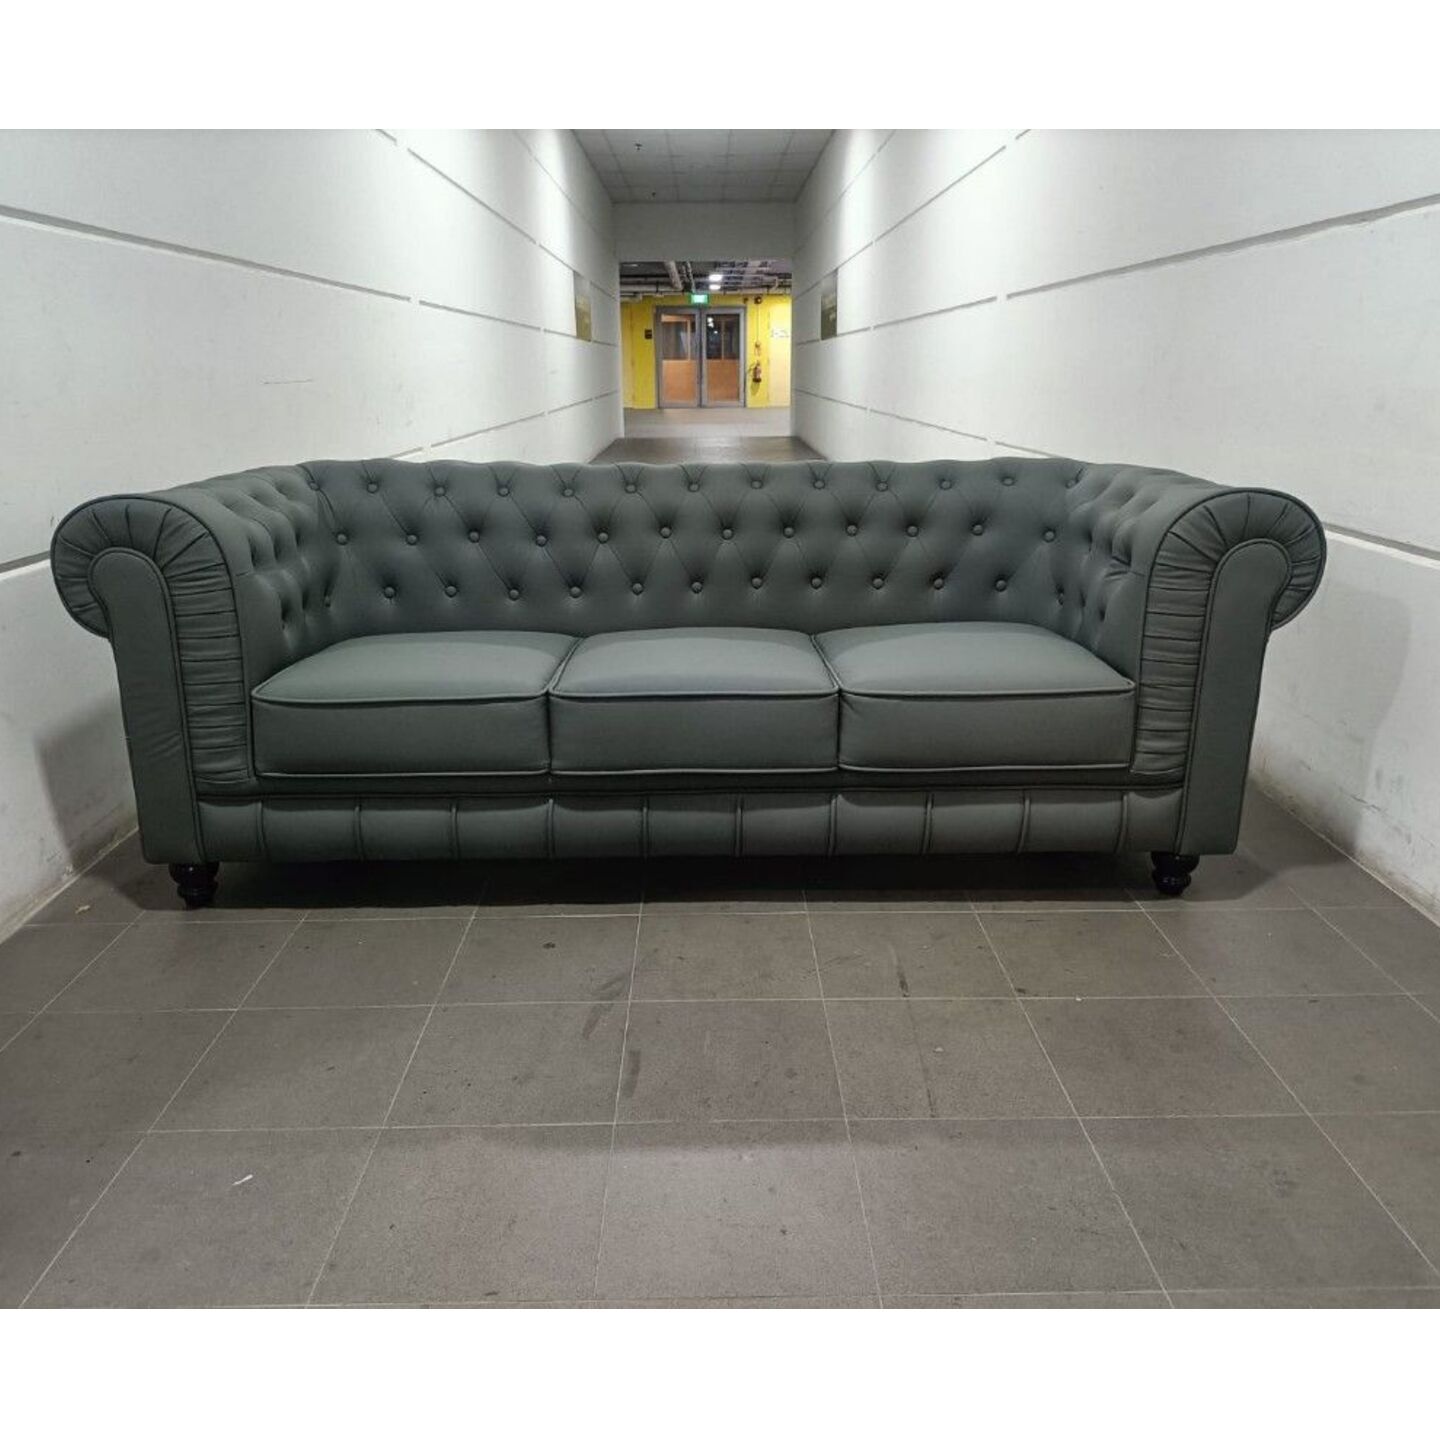 STAR BUY - PET FRIENDLY SALVADO II 3 Seater Chesterfield Sofa in OLIVE GREY TECH PU